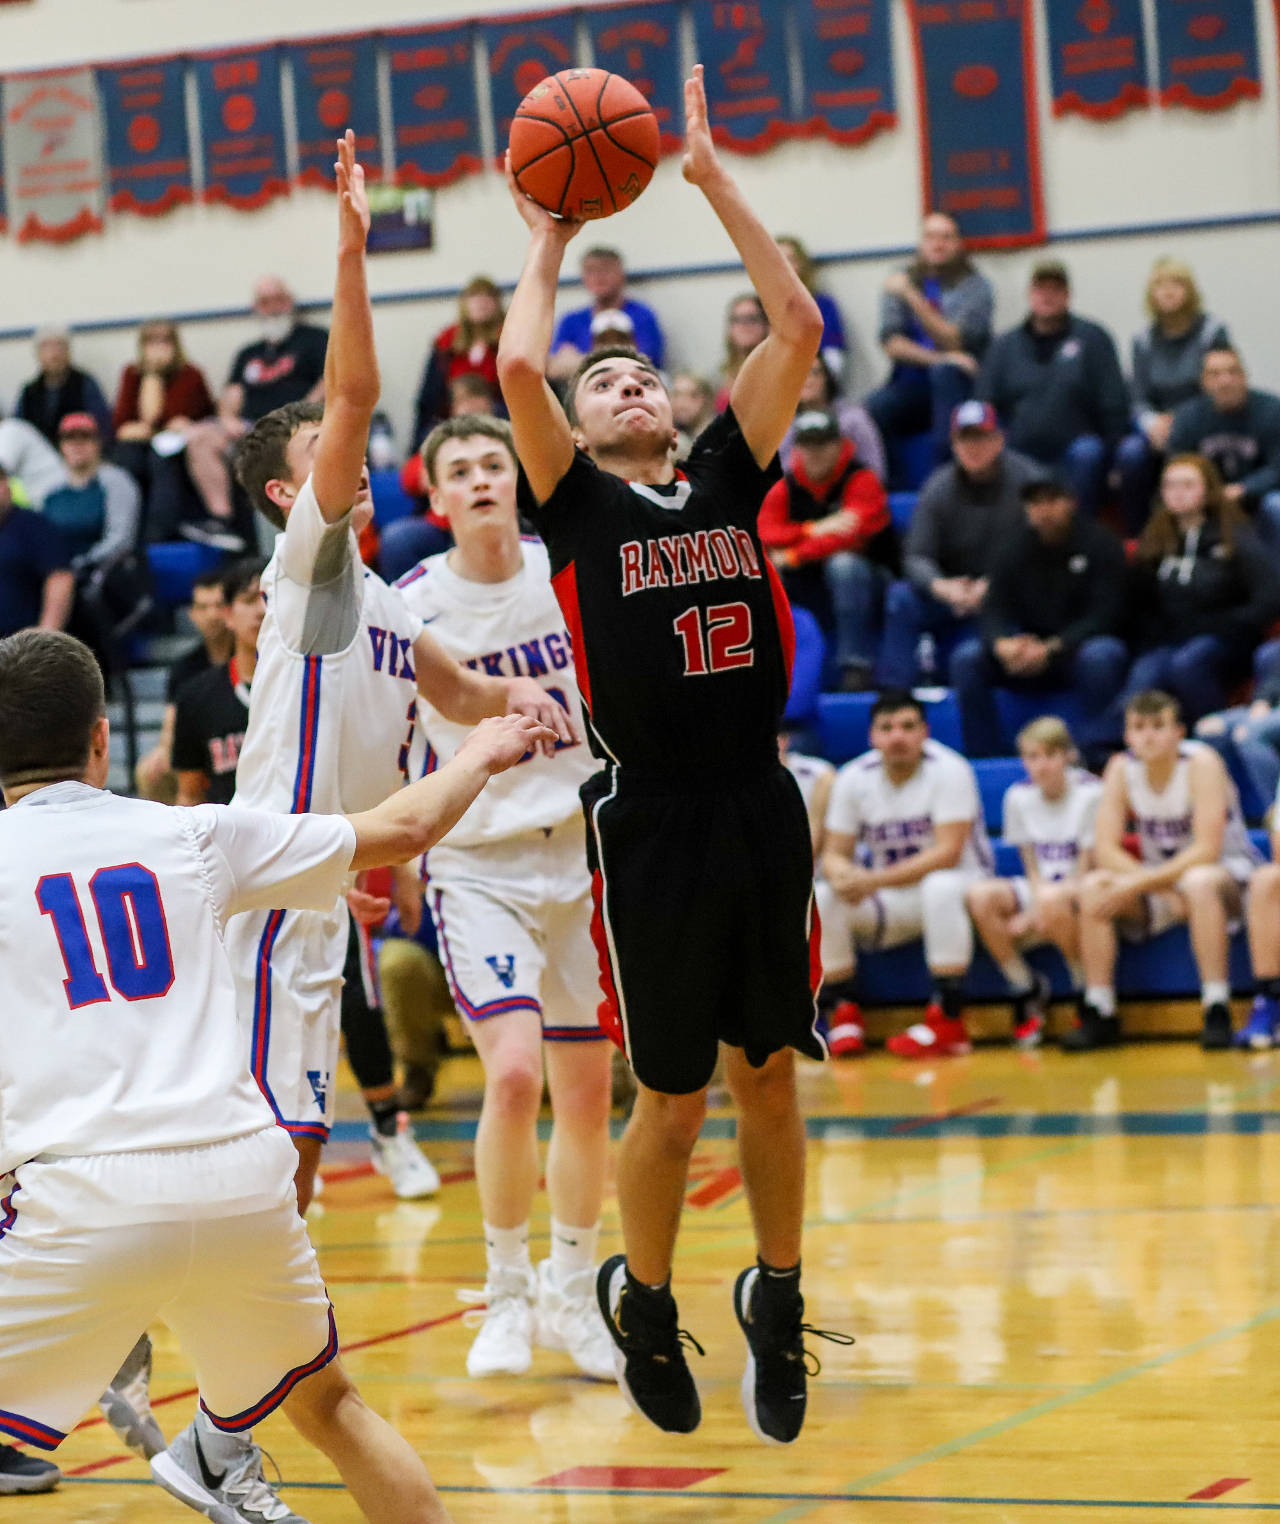 Raymond sophomore Tre’ Seydel (12), seen here against Willapa Valley on Jan. 10, was named the 2B boys WIAA Athlete of the Week on Wednesday. (Photo by Larry Bale)